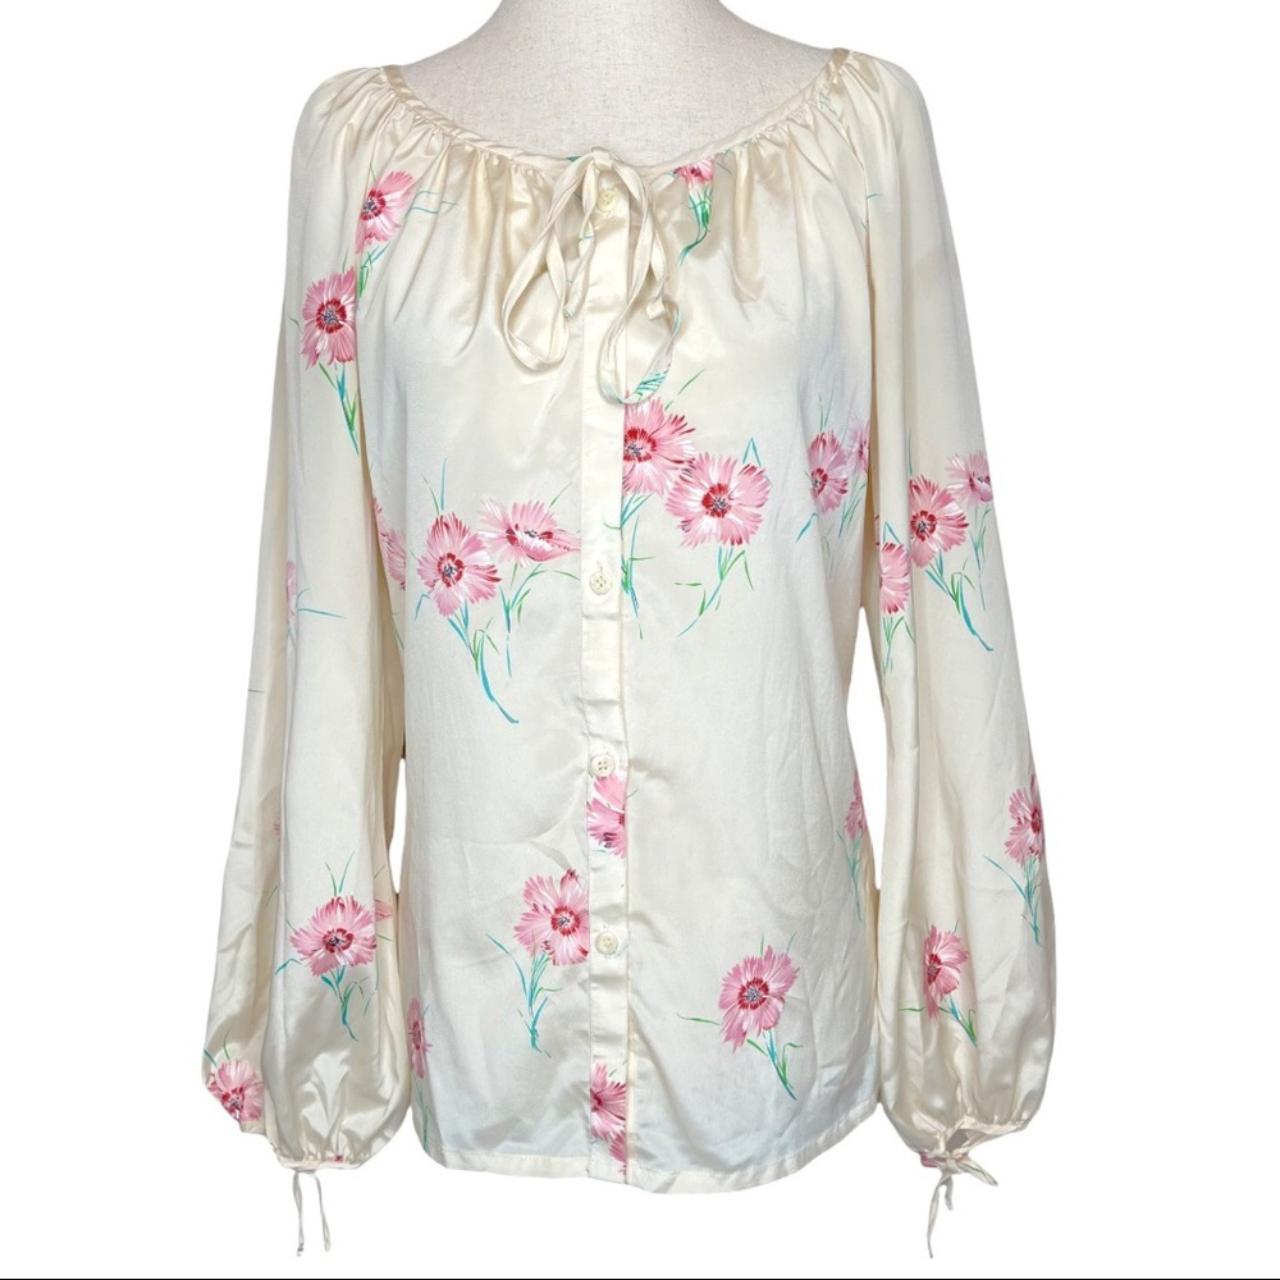 Product Image 1 - Vintage 70s Floral Balloon Sleeve